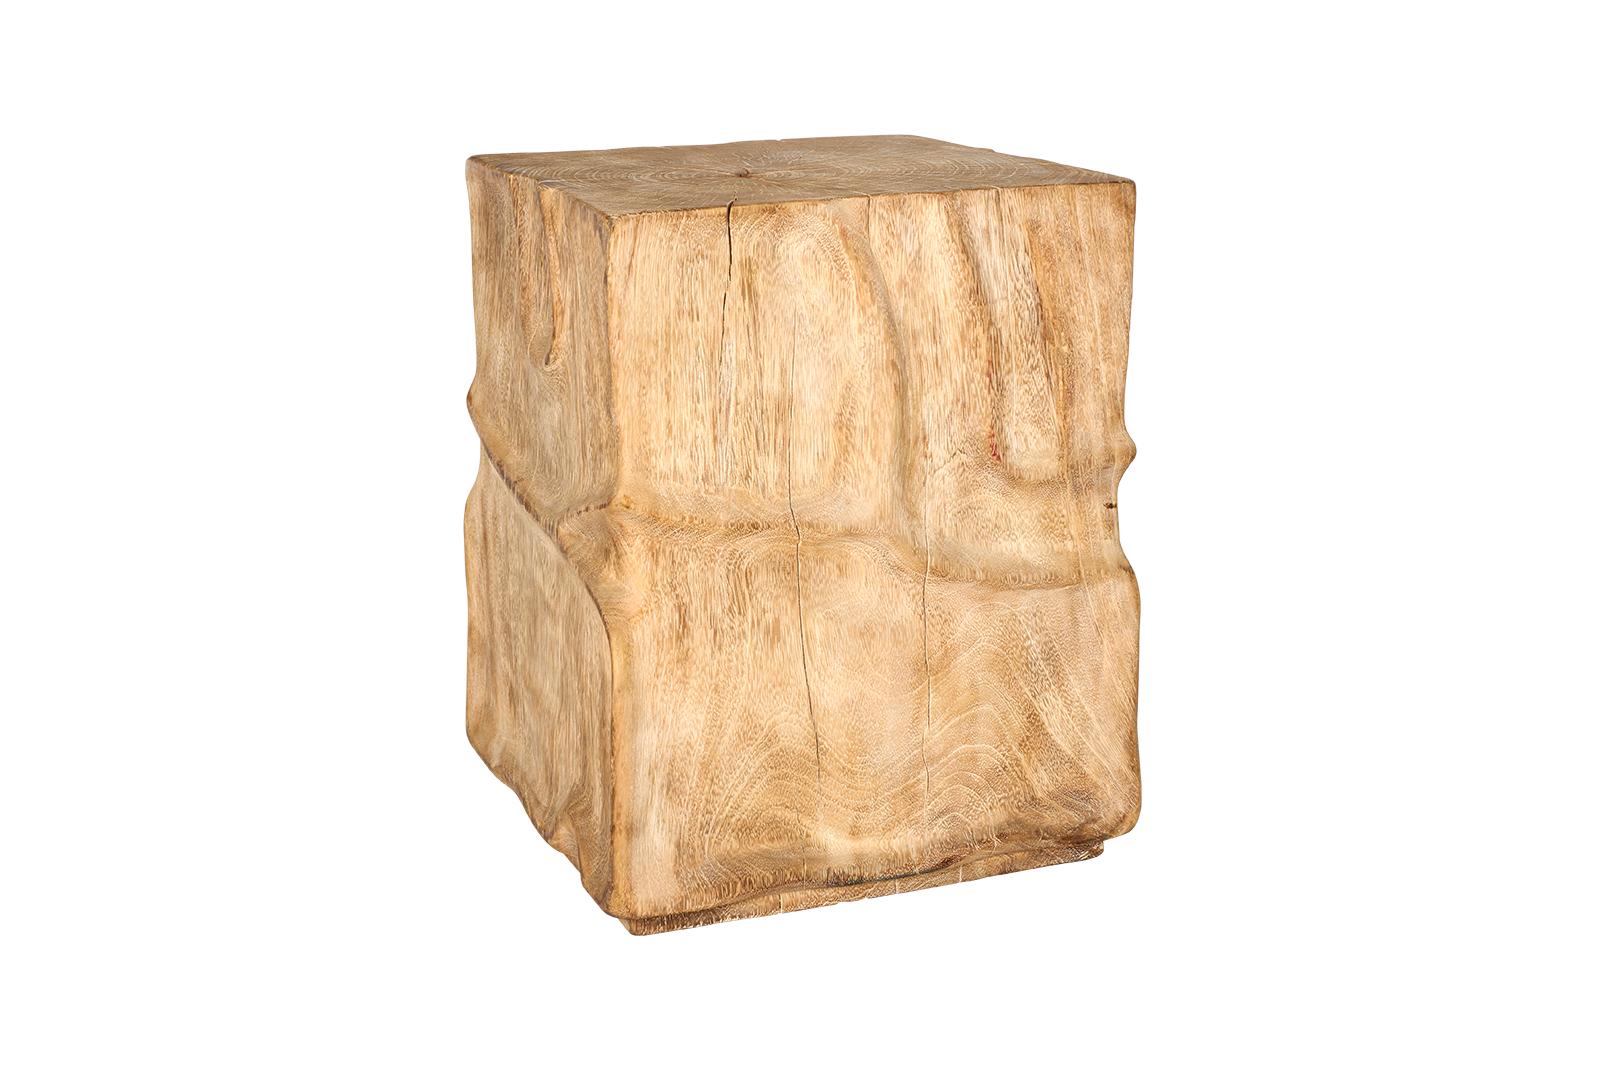 Organic Modern Organic Bleached Lychee Wood Block Side Table  For Sale